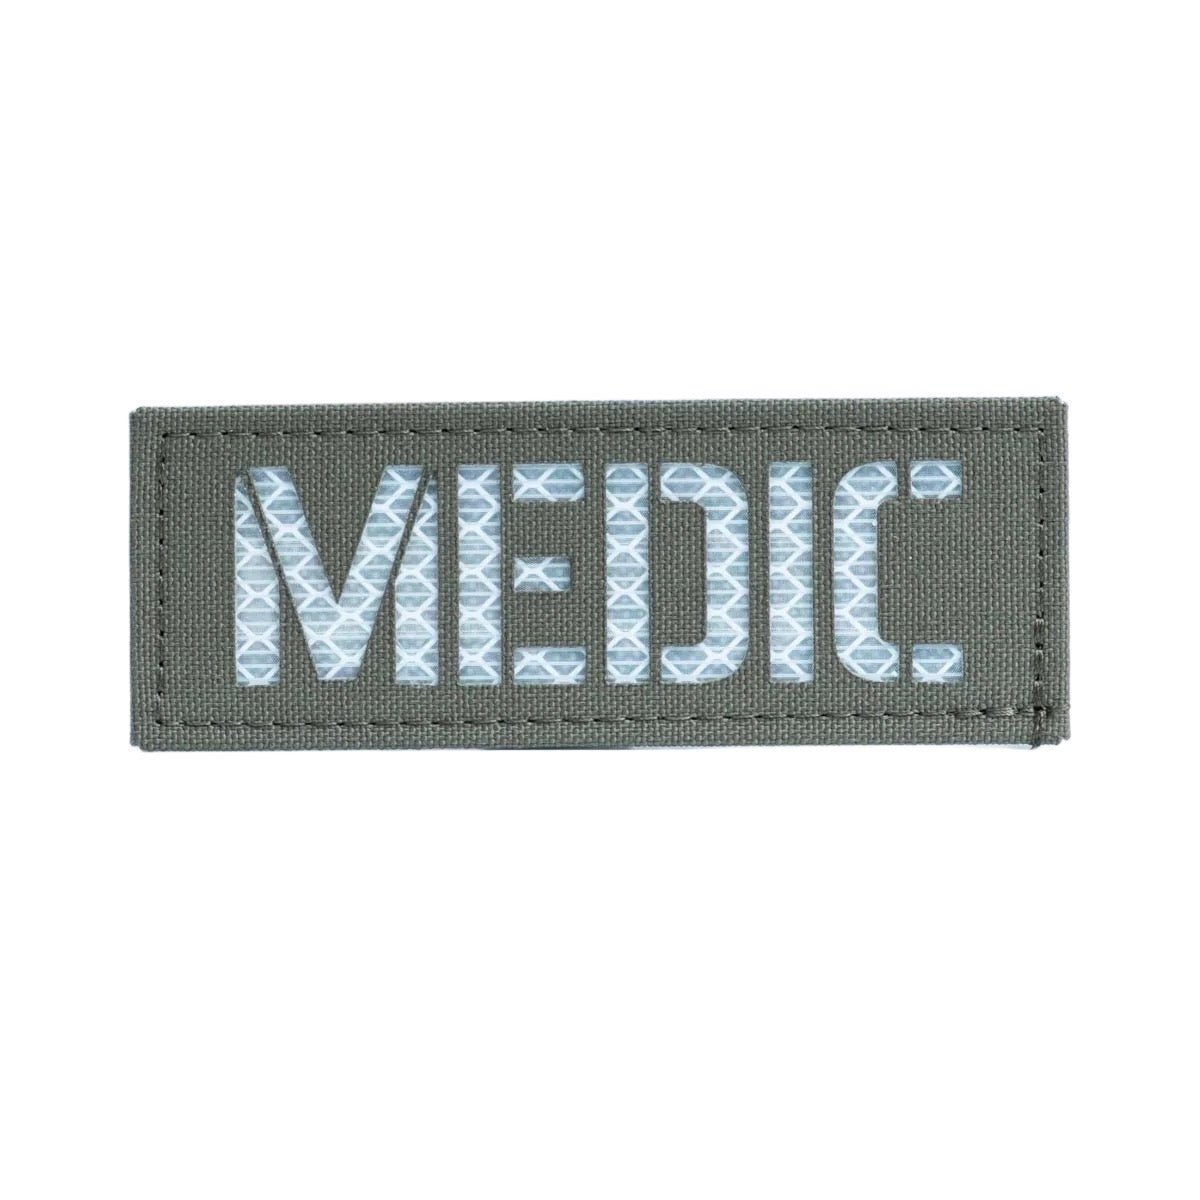 TERRA B MEDIC Patch Small - Olive